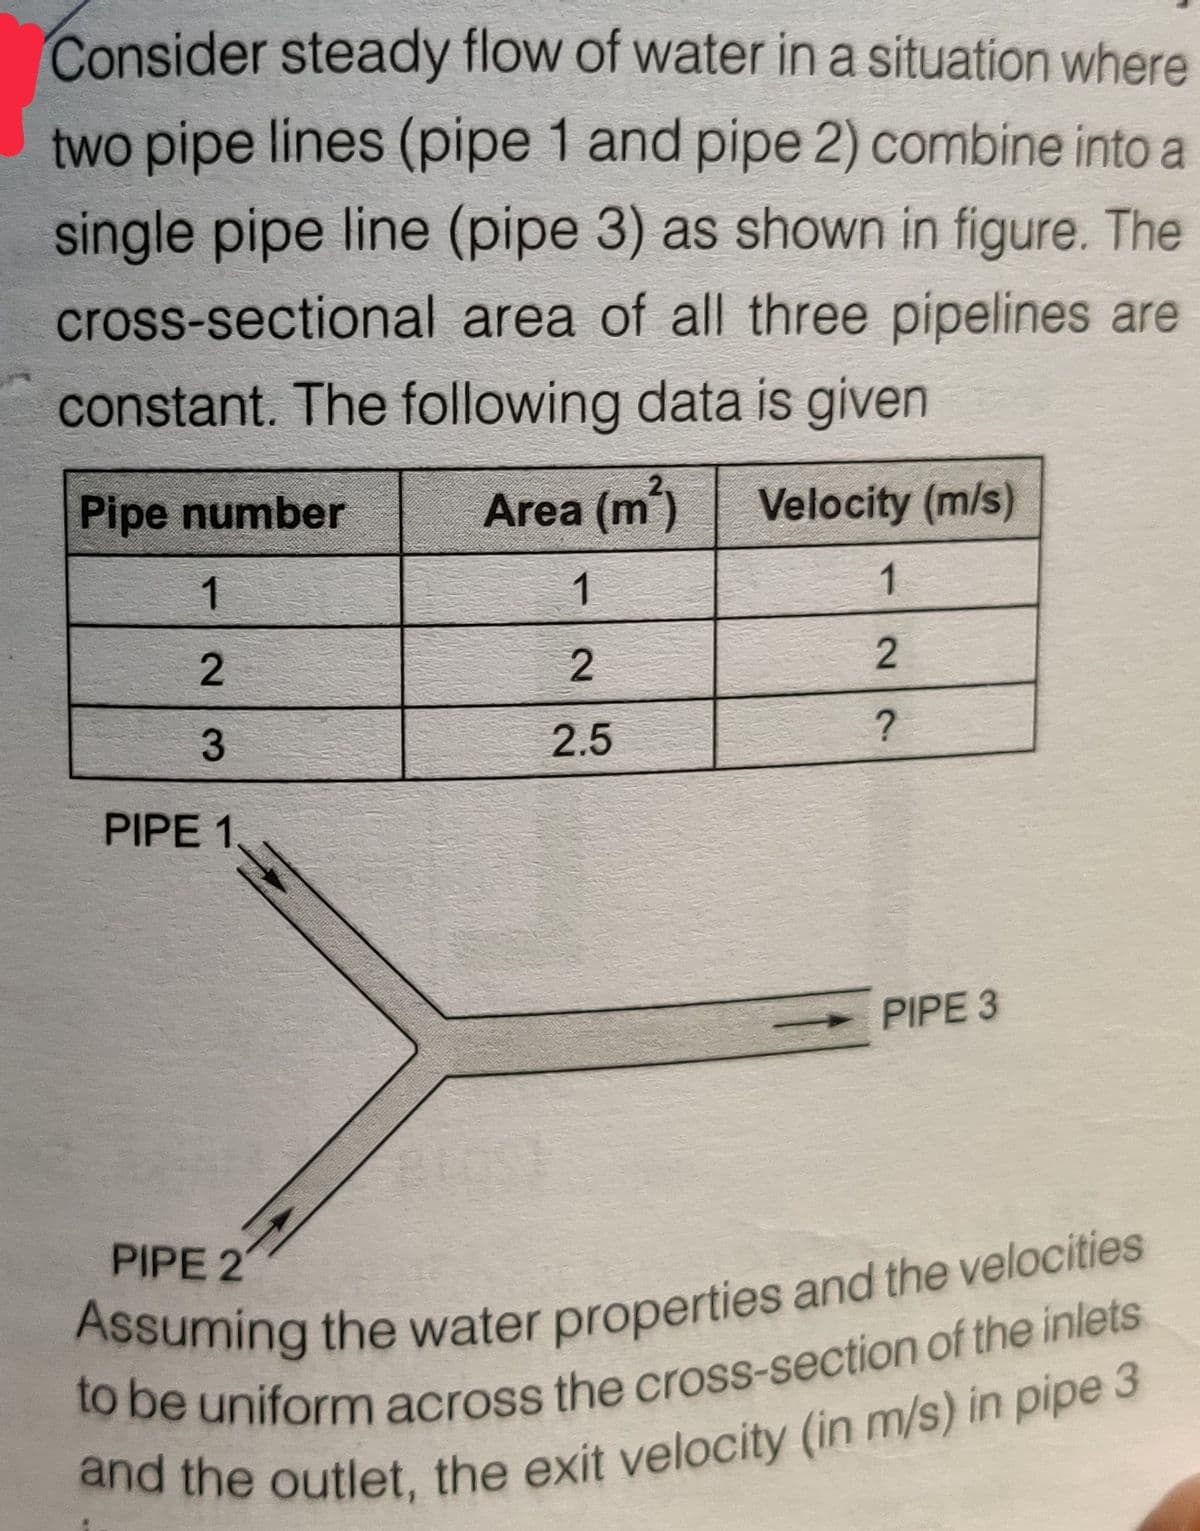 Consider steady flow of water in a situation where
two pipe lines (pipe 1 and pipe 2) combine into a
single pipe line (pipe 3) as shown in figure. The
cross-sectional area of all three pipelines are
constant. The following data is given
Pipe number
Area (m)
Velocity (m/s)
1
3.
2.5
PIPE 1.
PIPE 3
PIPE 2
